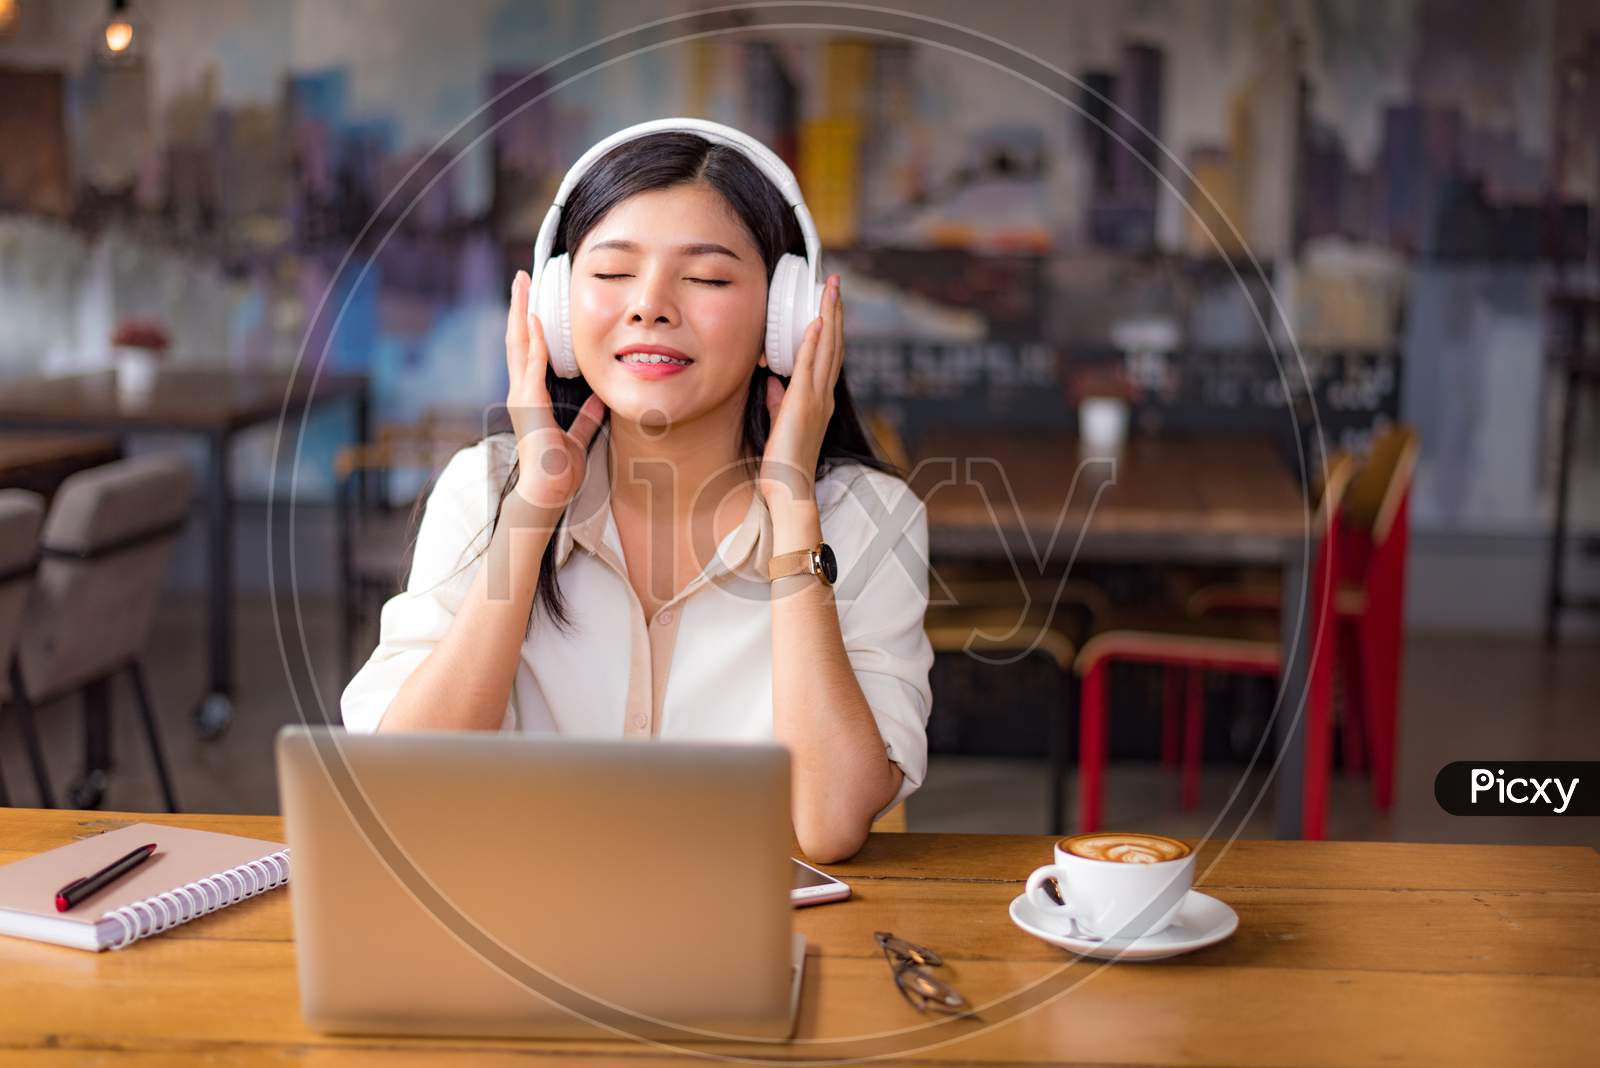 Beautiful Asian Woman Relaxing And Listening To Music In Cafe With Laptop Computer And Coffee Cup. People And Lifestyles Concept. Freelance Happy Workplace Theme. University And College Theme.